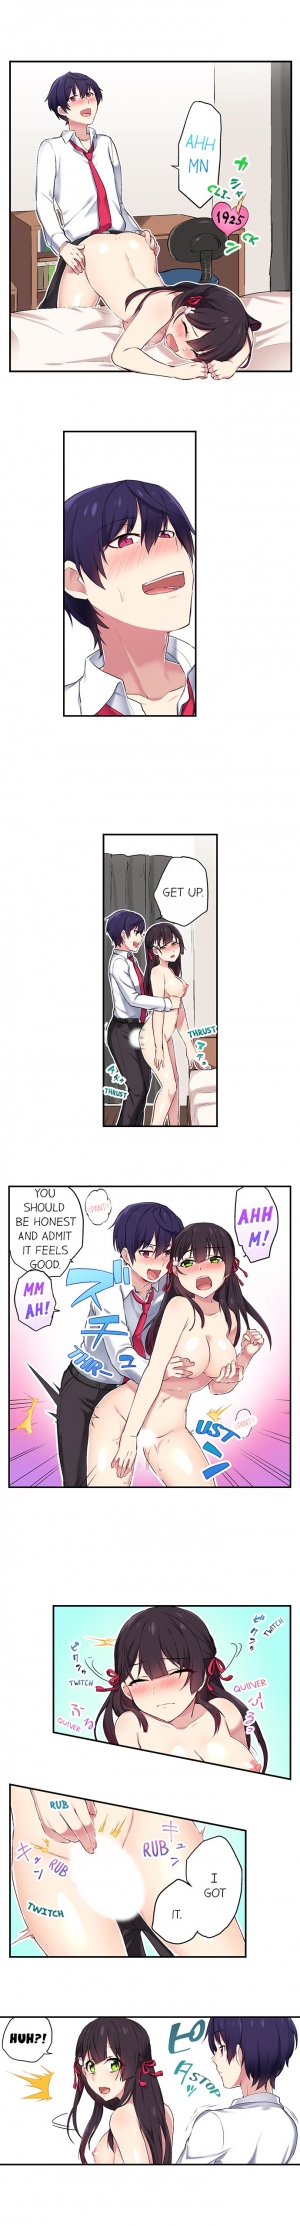  Committee Chairman, Didn't You Just Masturbate In the Bathroom? I Can See the Number of Times People Orgasm [English](Ongoing) - Page 77